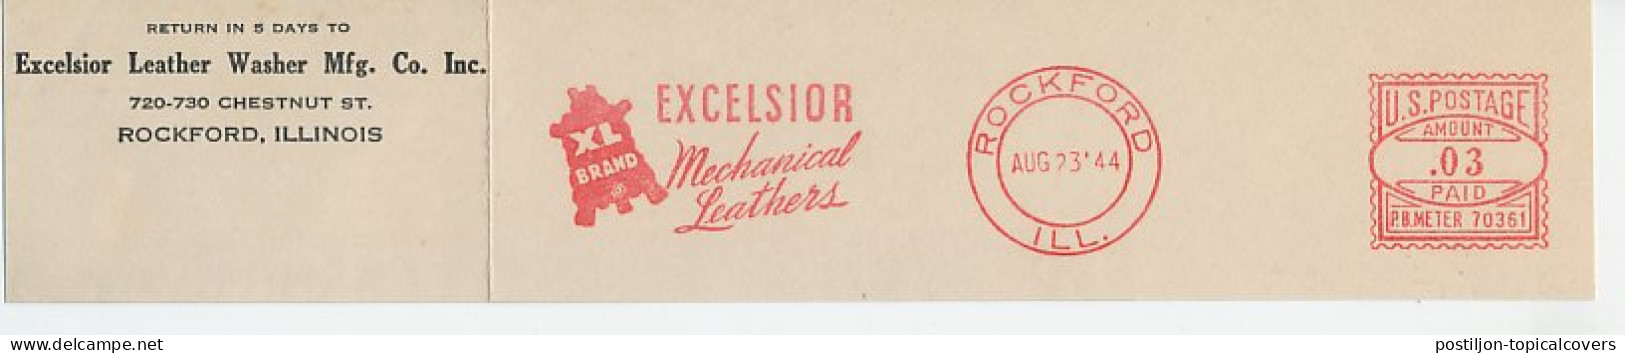 Meter Top Cut USA 1944 Mechanical Leather - Excelsior - Unclassified